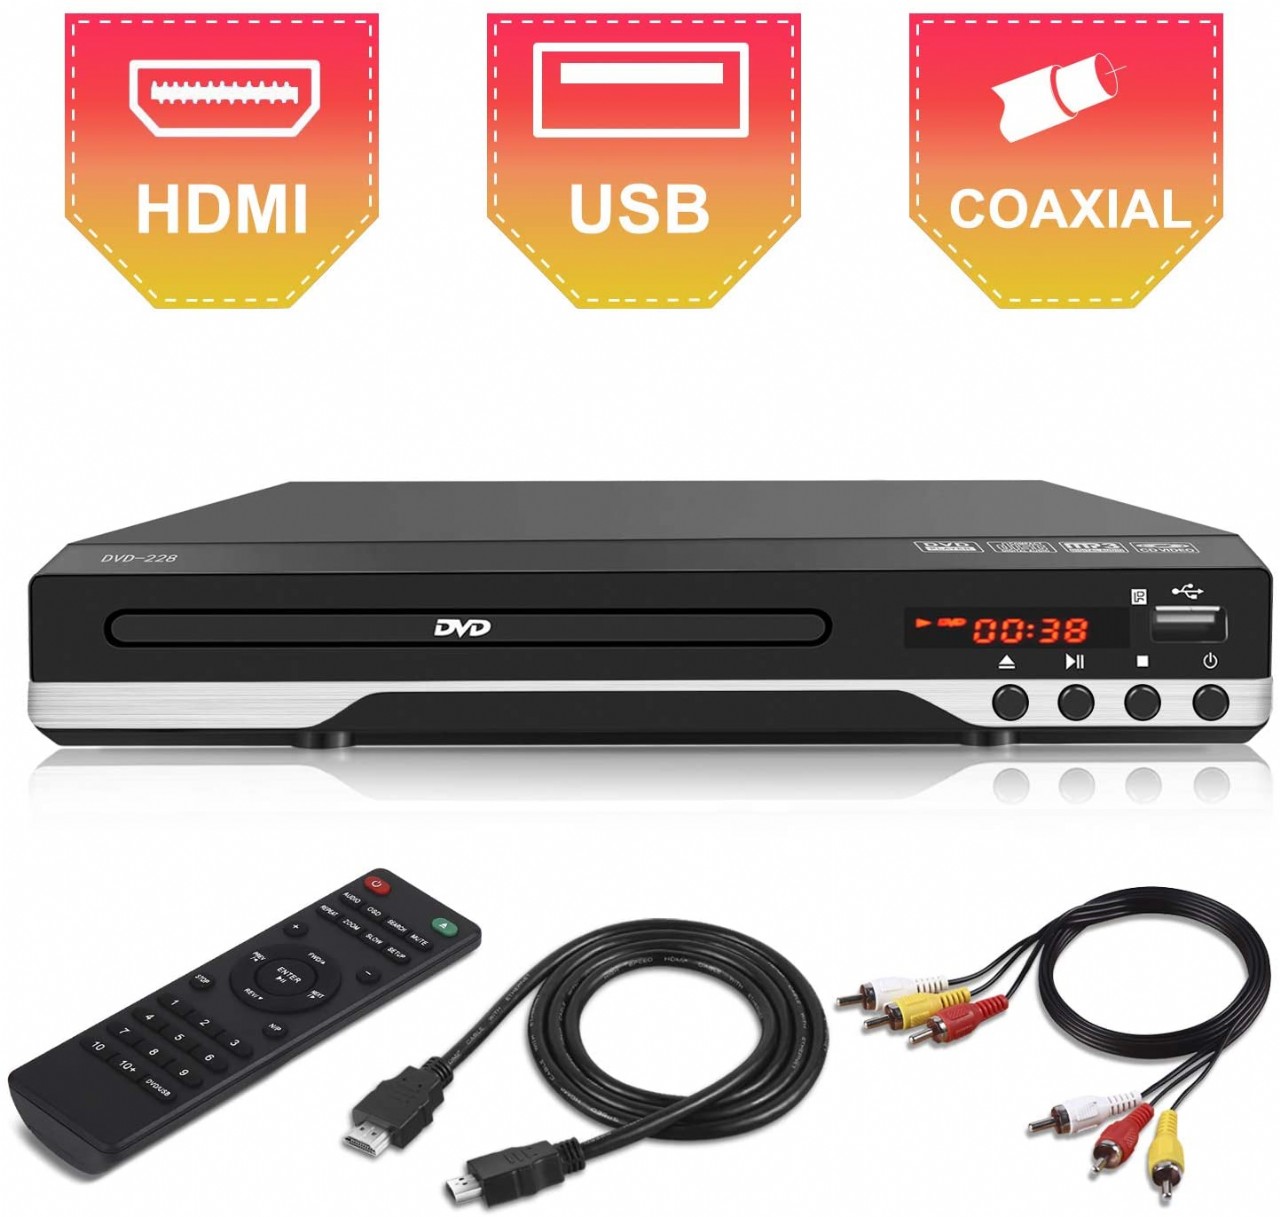 Compact DVD Player for TV - Multi Region HDMI 1080P Digital DVD Player with Remote Control, USB Port